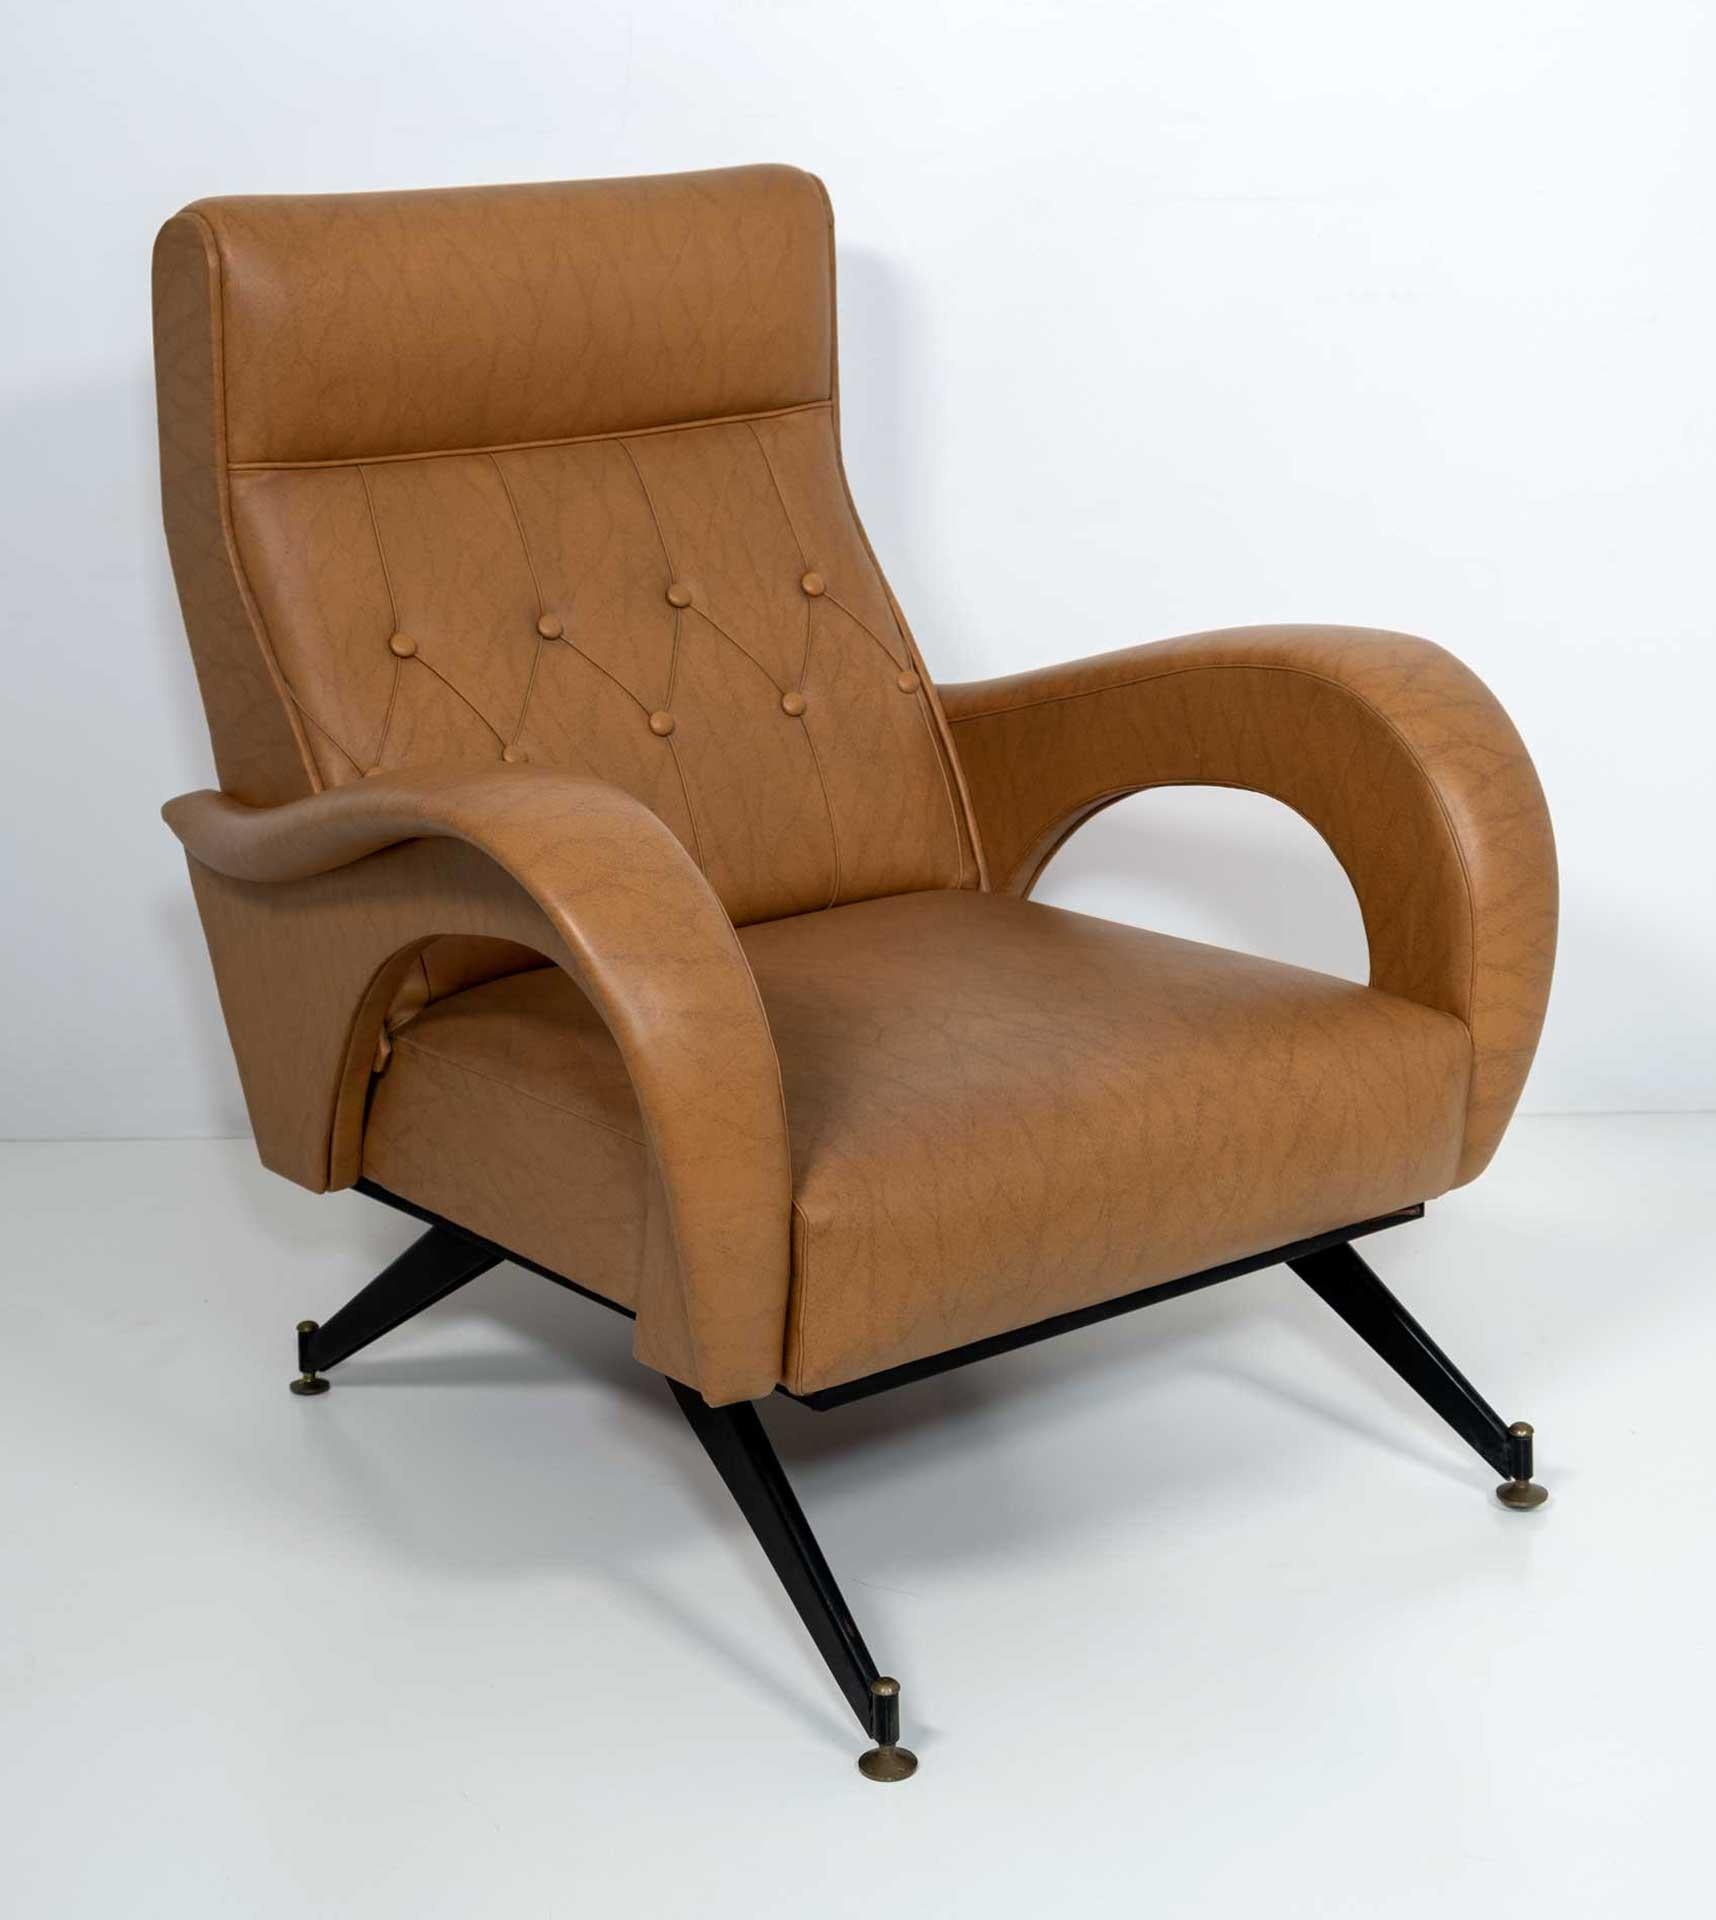 Marco Zanuso style lounge armchair from the 60s covered in eco-leather. The upholstery is original and in good condition, as shown in the photos.